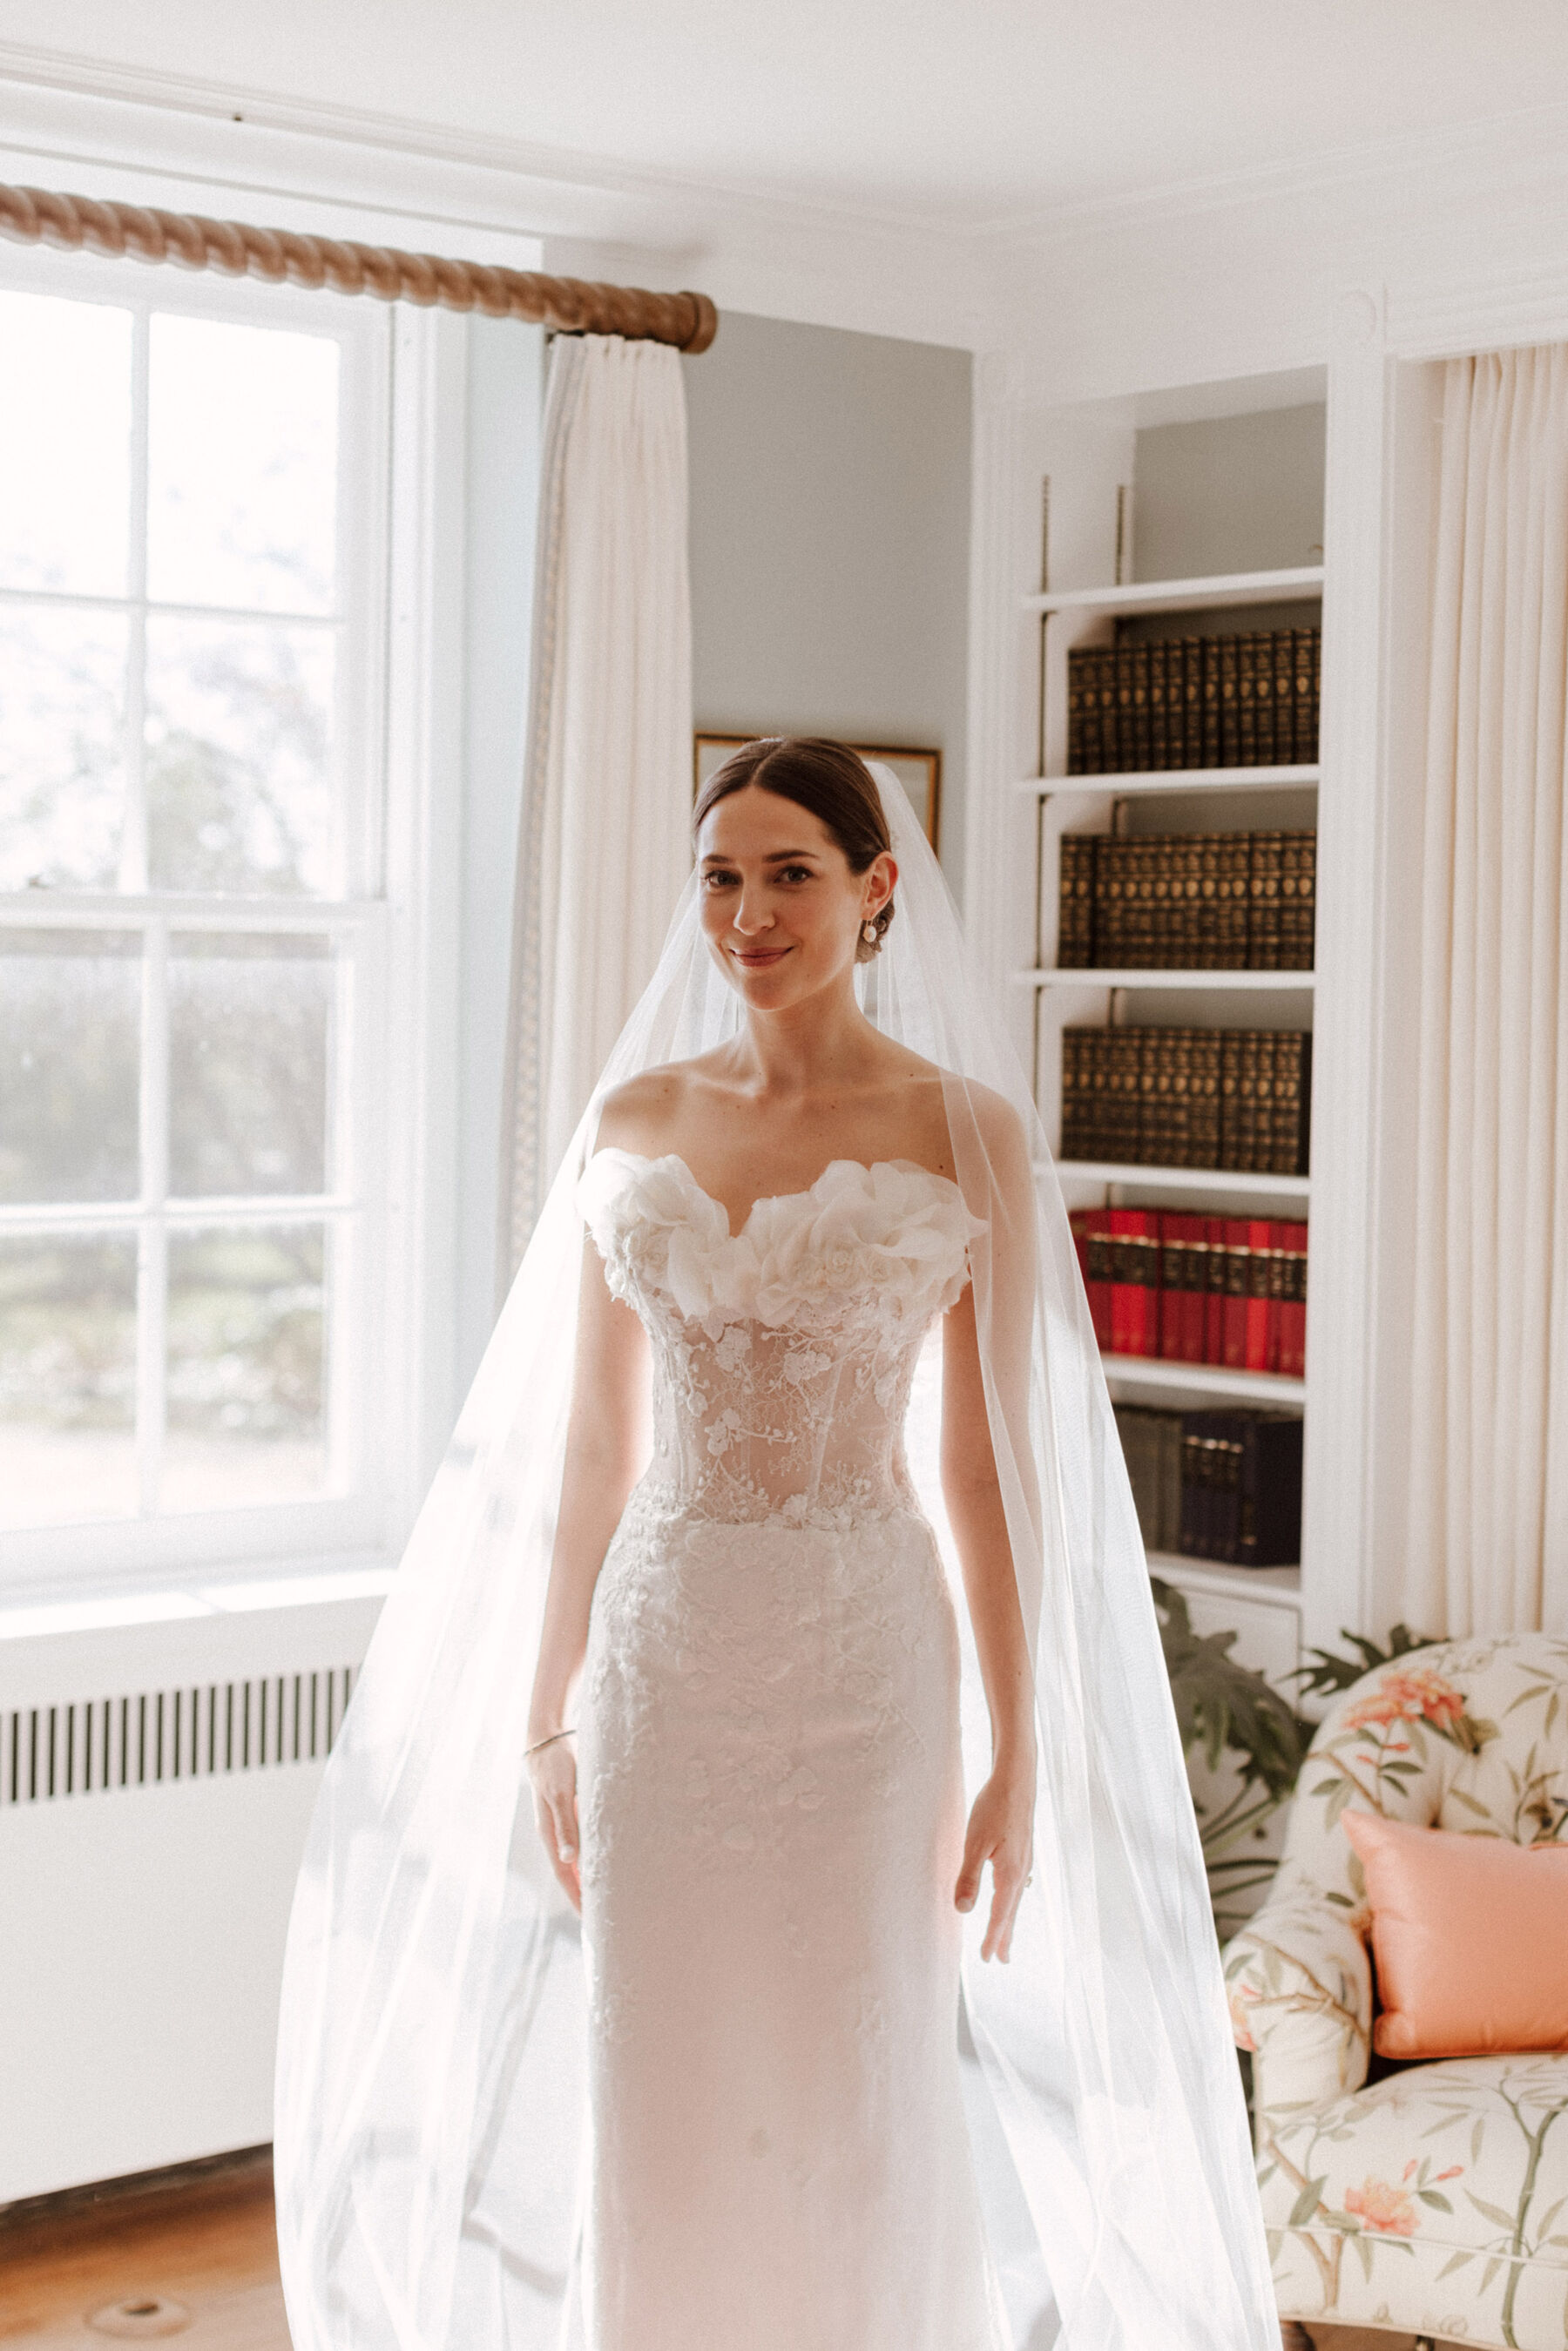 Wedding dress with corset by Sally Bean Couture. Image by The Curries.